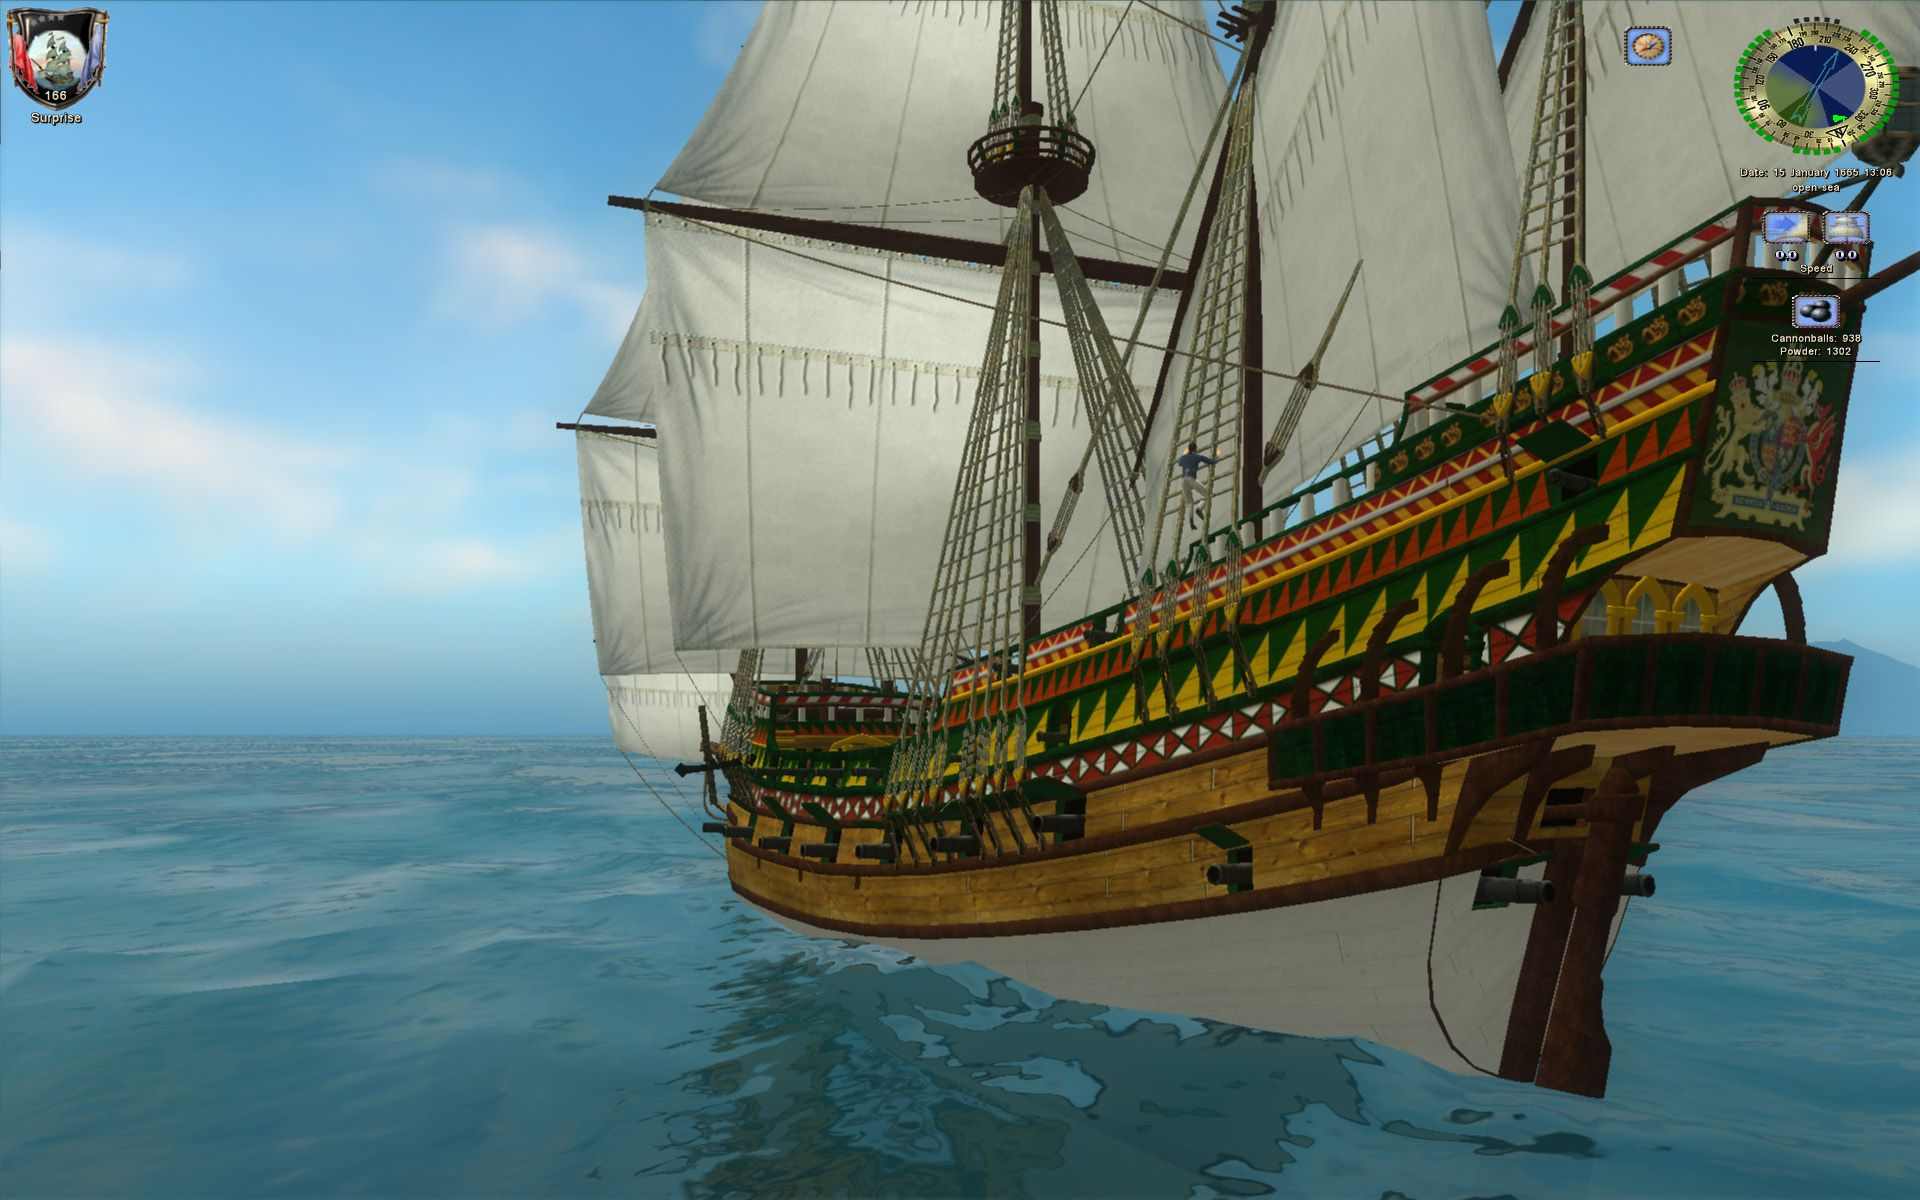 age-of-pirates-2-city-of-abandoned-ships-download-free-full-game-speed-new